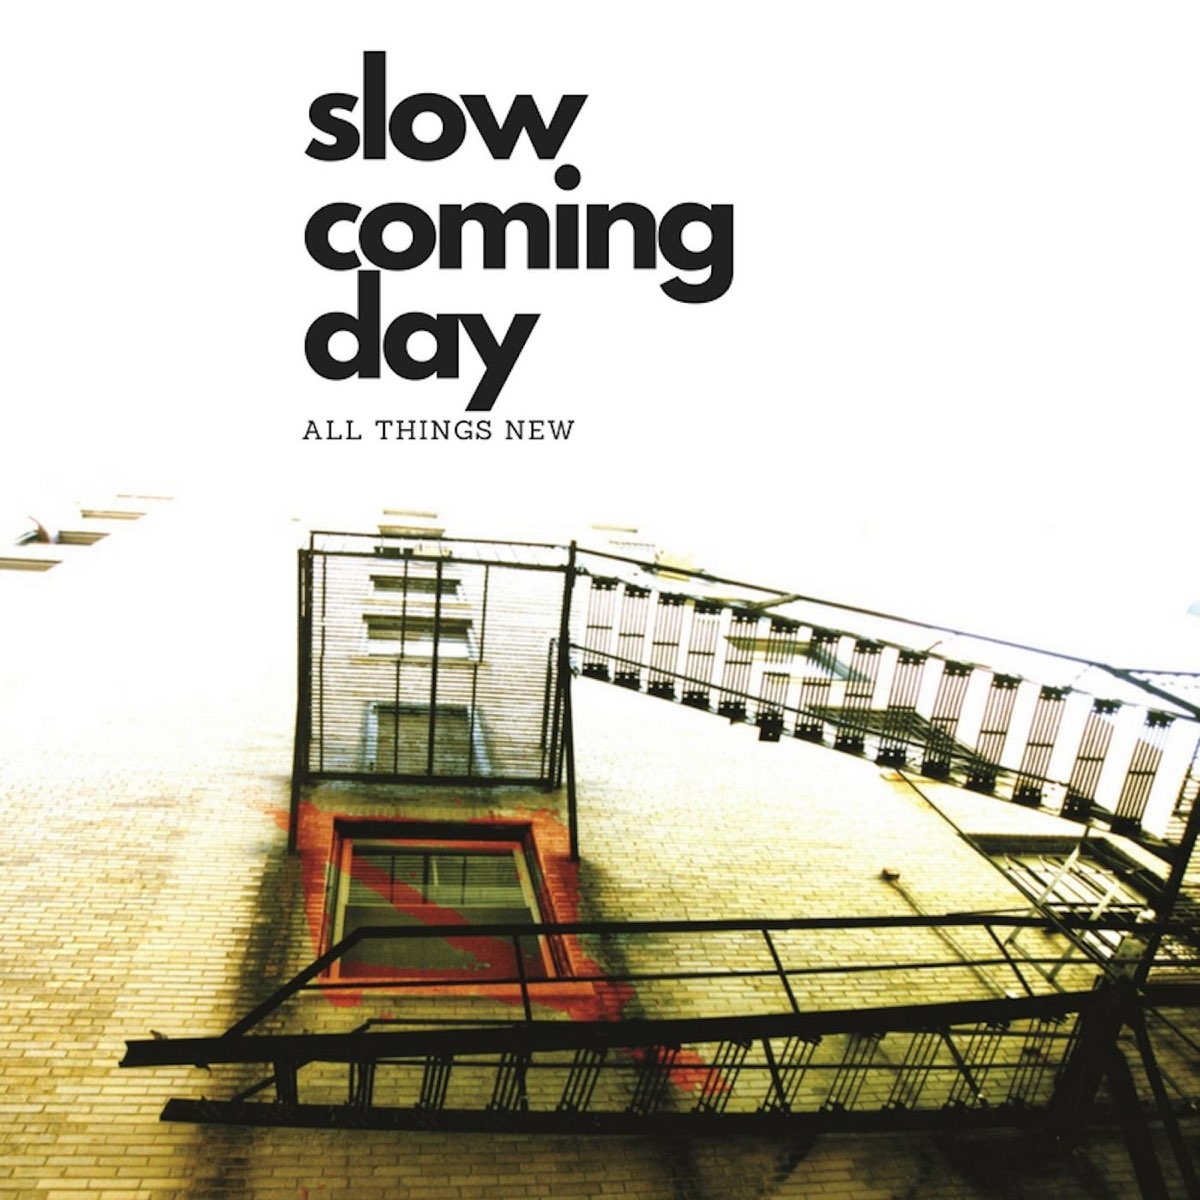 New slow. Slow is coming. Slow is coming перевод. Slow is coming ответы. Chapter 5 Slow is coming.